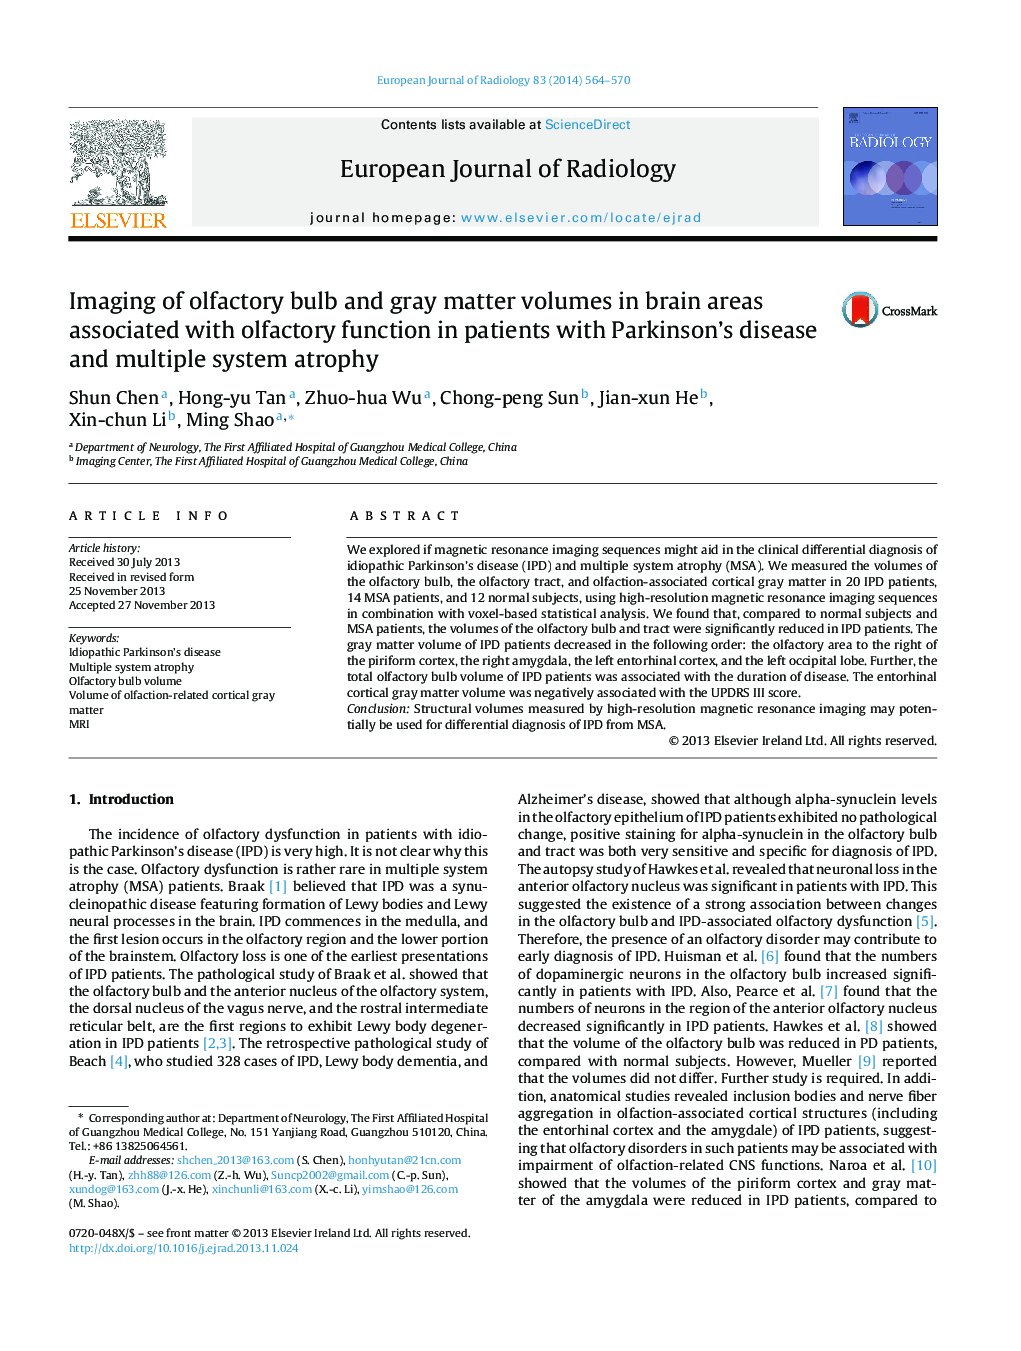 Imaging of olfactory bulb and gray matter volumes in brain areas associated with olfactory function in patients with Parkinson's disease and multiple system atrophy